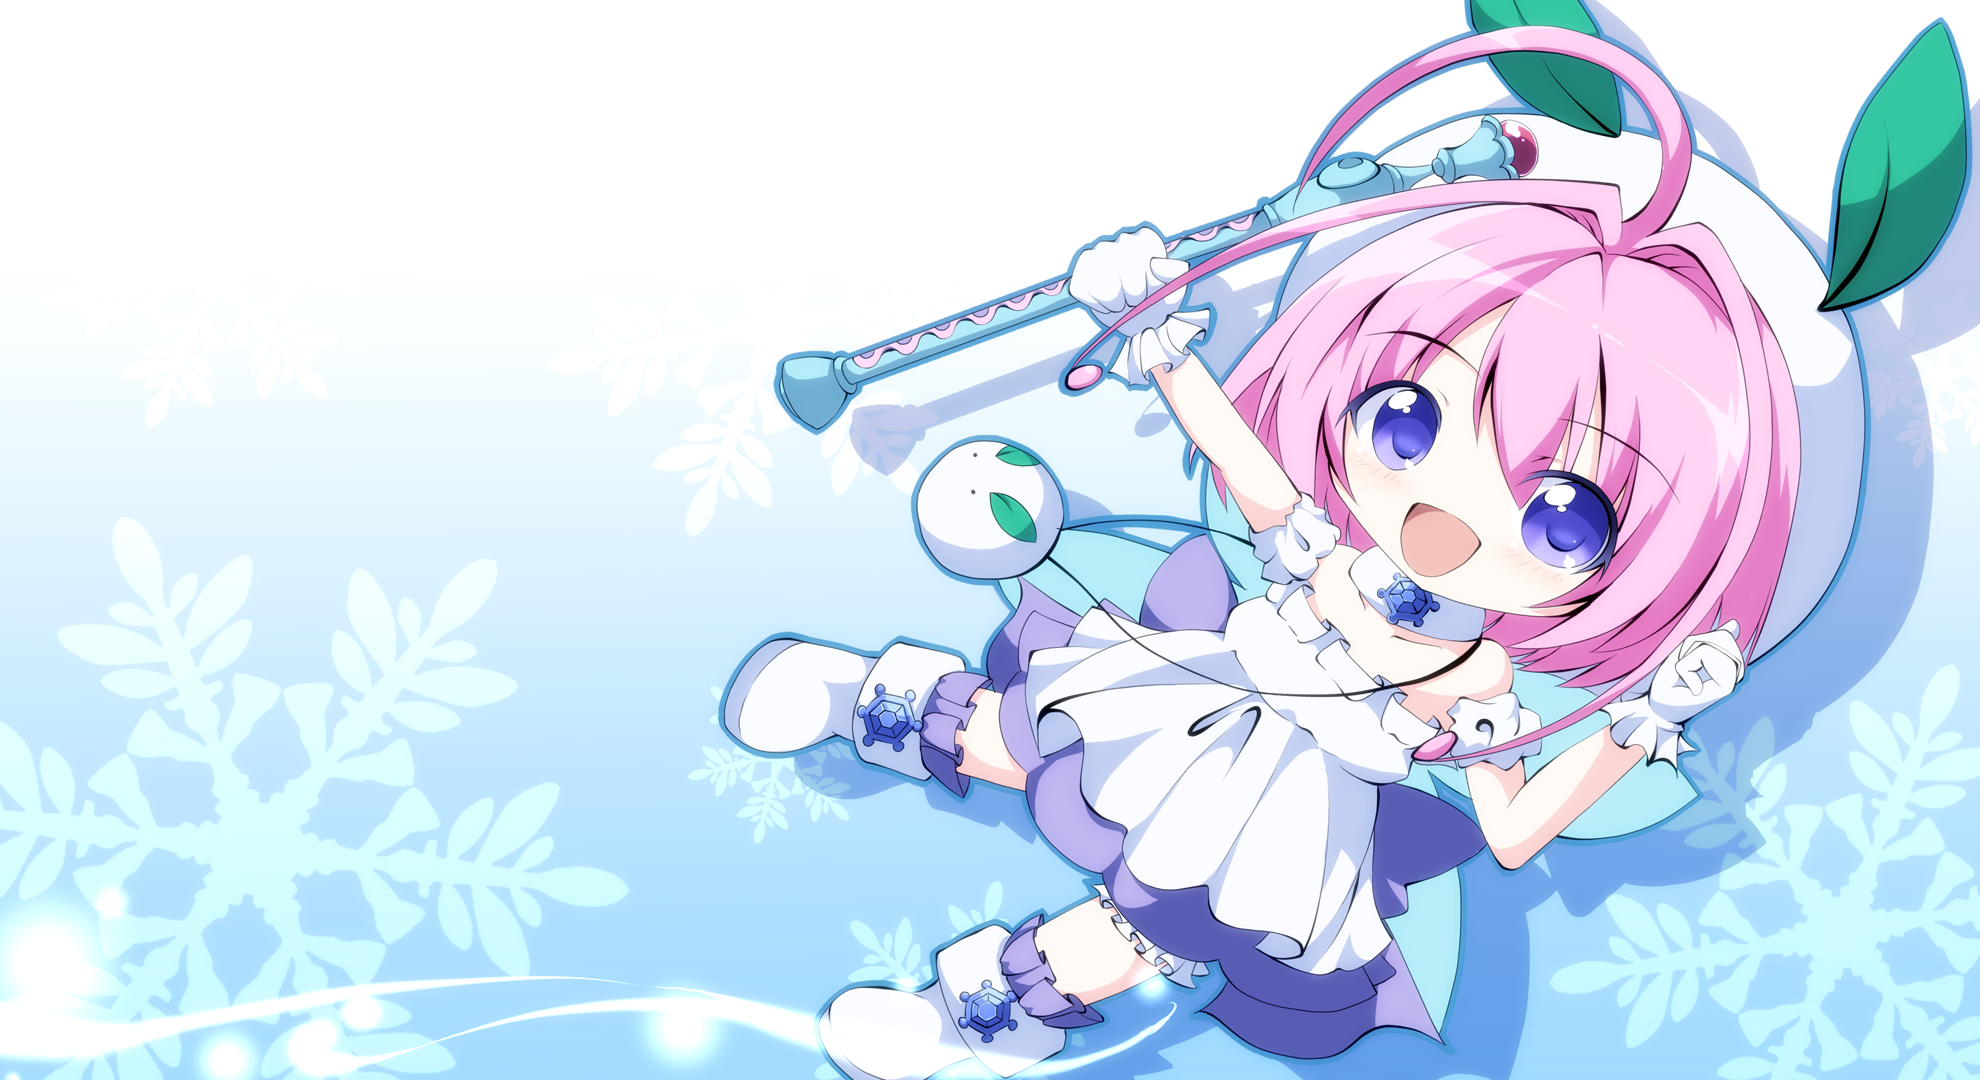 Blue Clothing Gloves Boots Happy Pink Hair Short Hair Purple Eyes Chibi Looking At Viewer Snow Flake 1980x1080